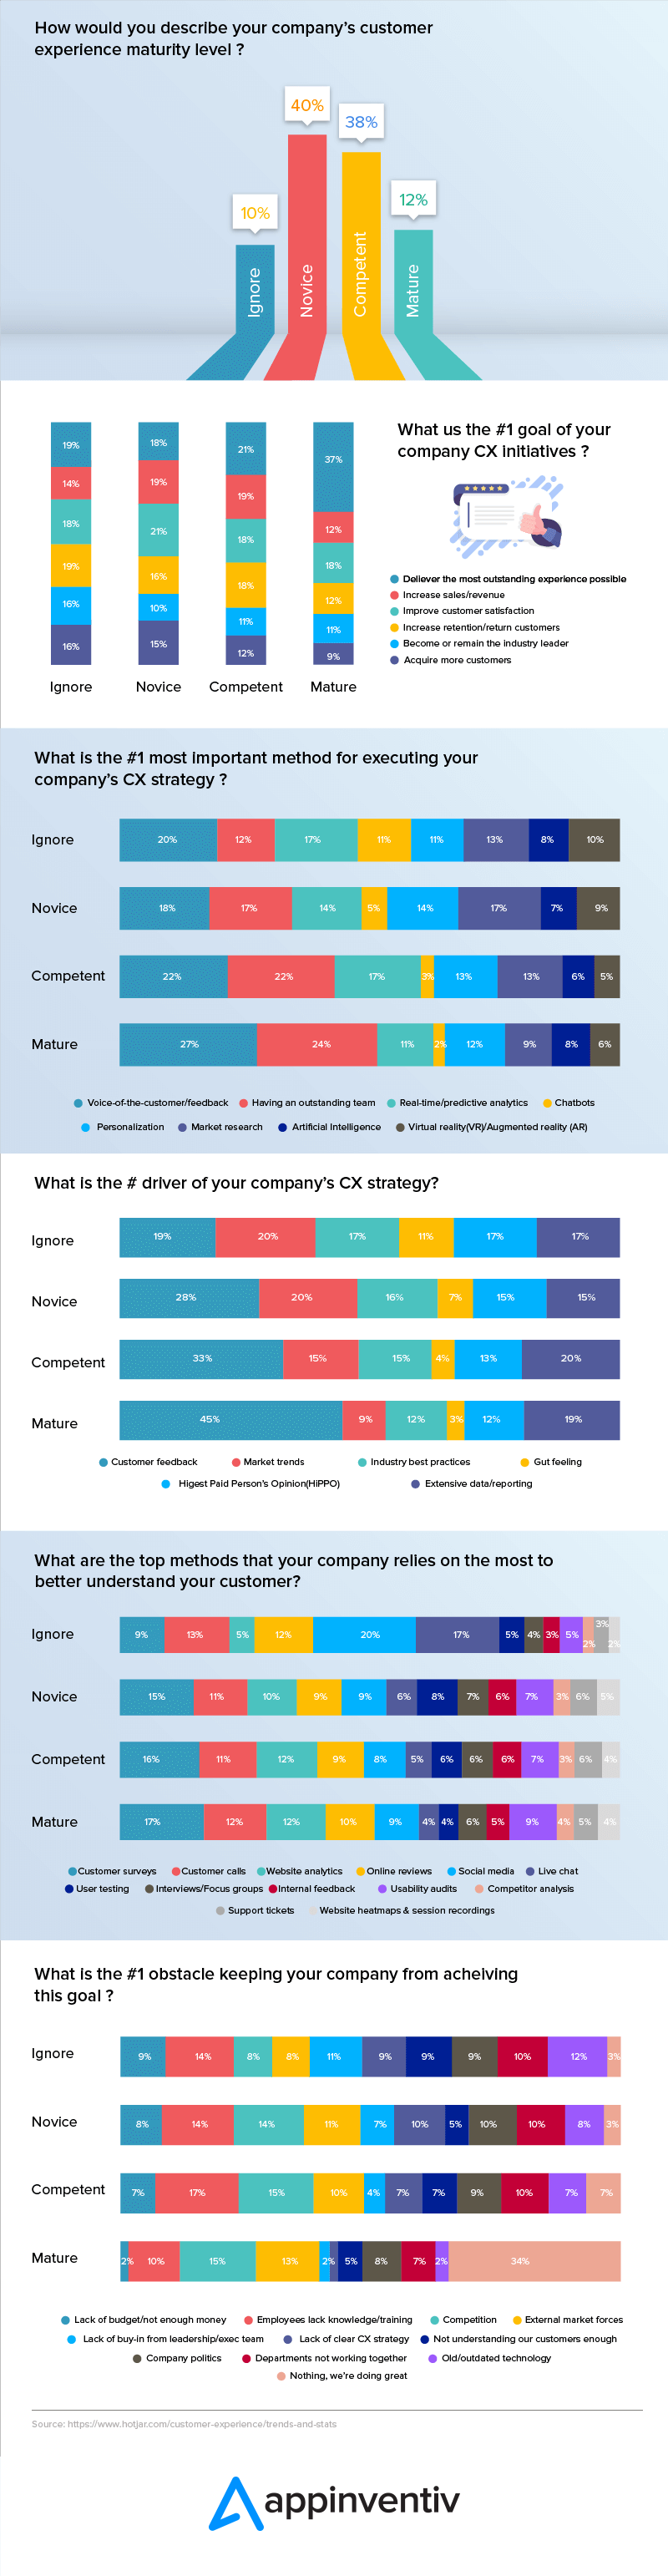 How would you describe your's company's customer experience maturity level